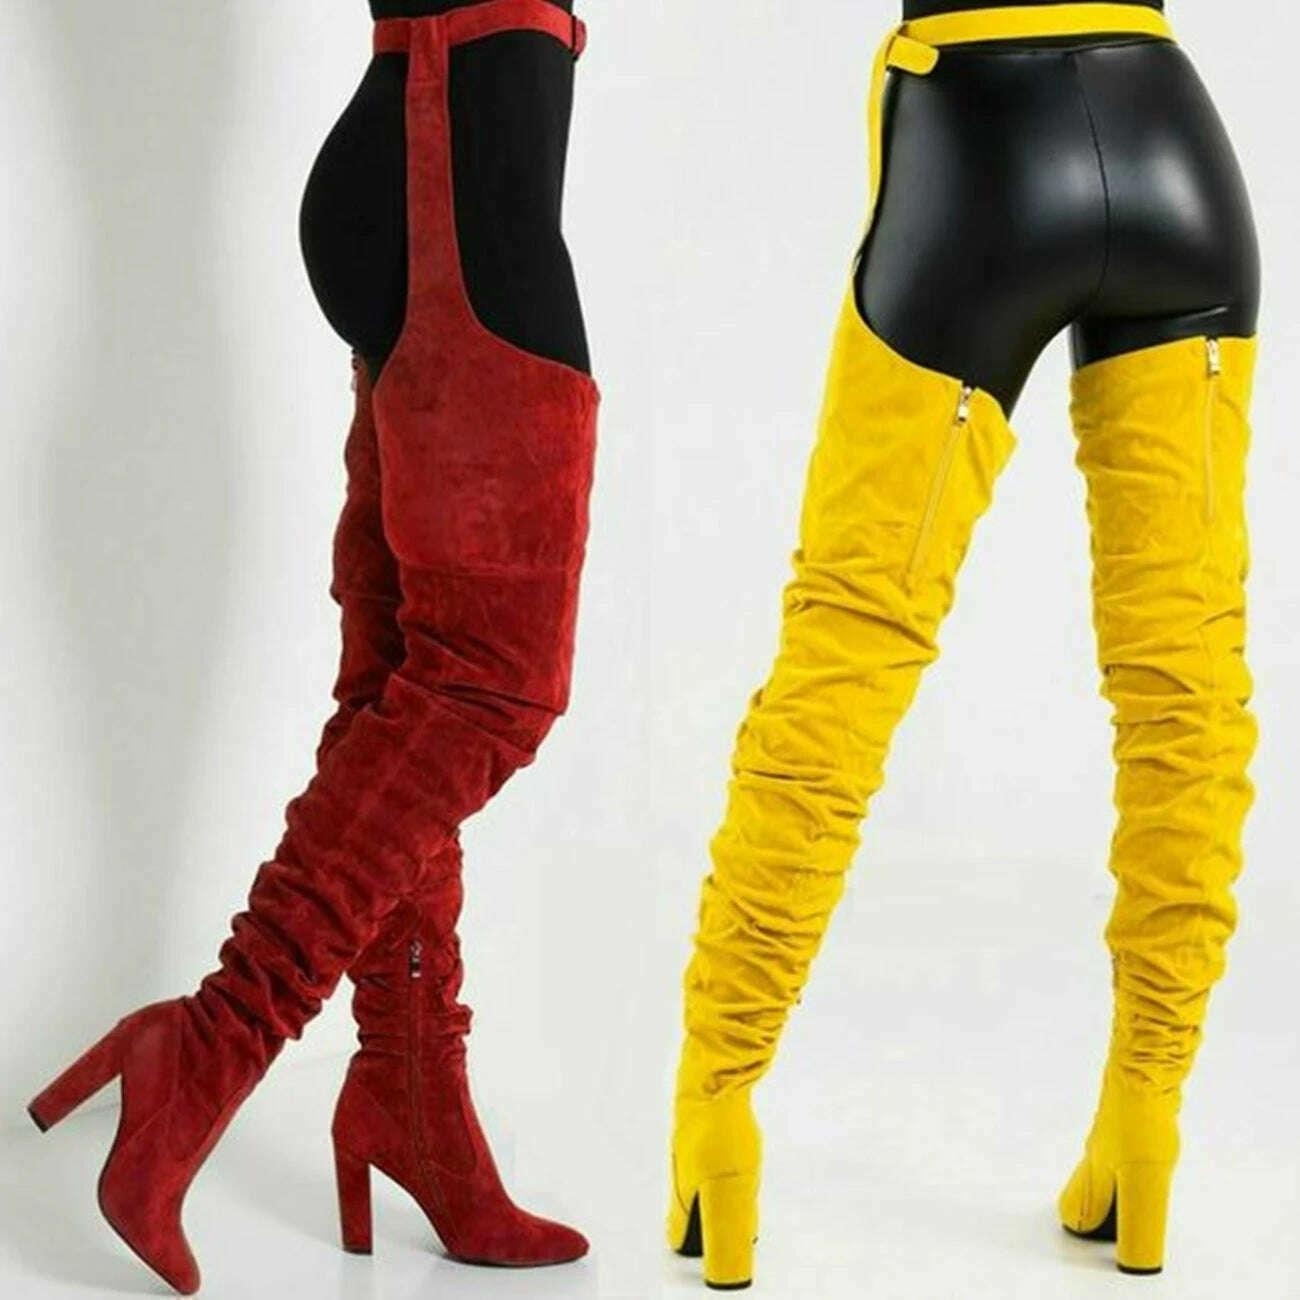 KIMLUD, Sestito Women Sexy Side Zipper Thigh High Boots Female Belt Trousers Boots Ladies Flock Pointed Toe Suqare High Heels Boots, Yellow / 34, KIMLUD Womens Clothes